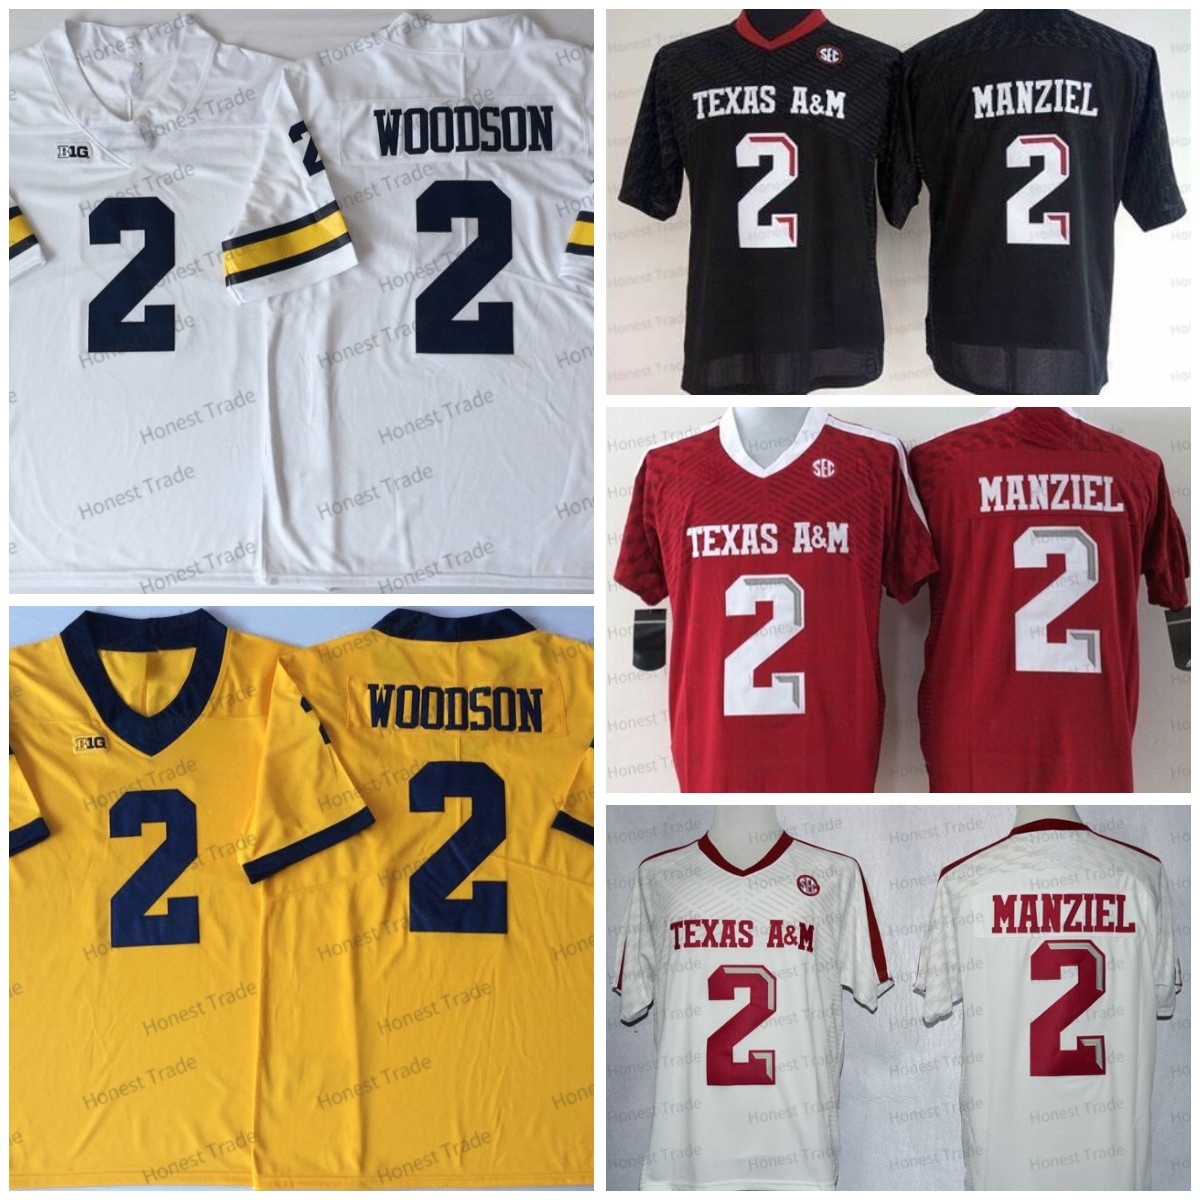 

NCAA 2 Johnny Manziel Football Jersey 2 Charles Woodson Michigan Wolverines Texas Aggies College Mens Football Jerseys Stitched, Men;as